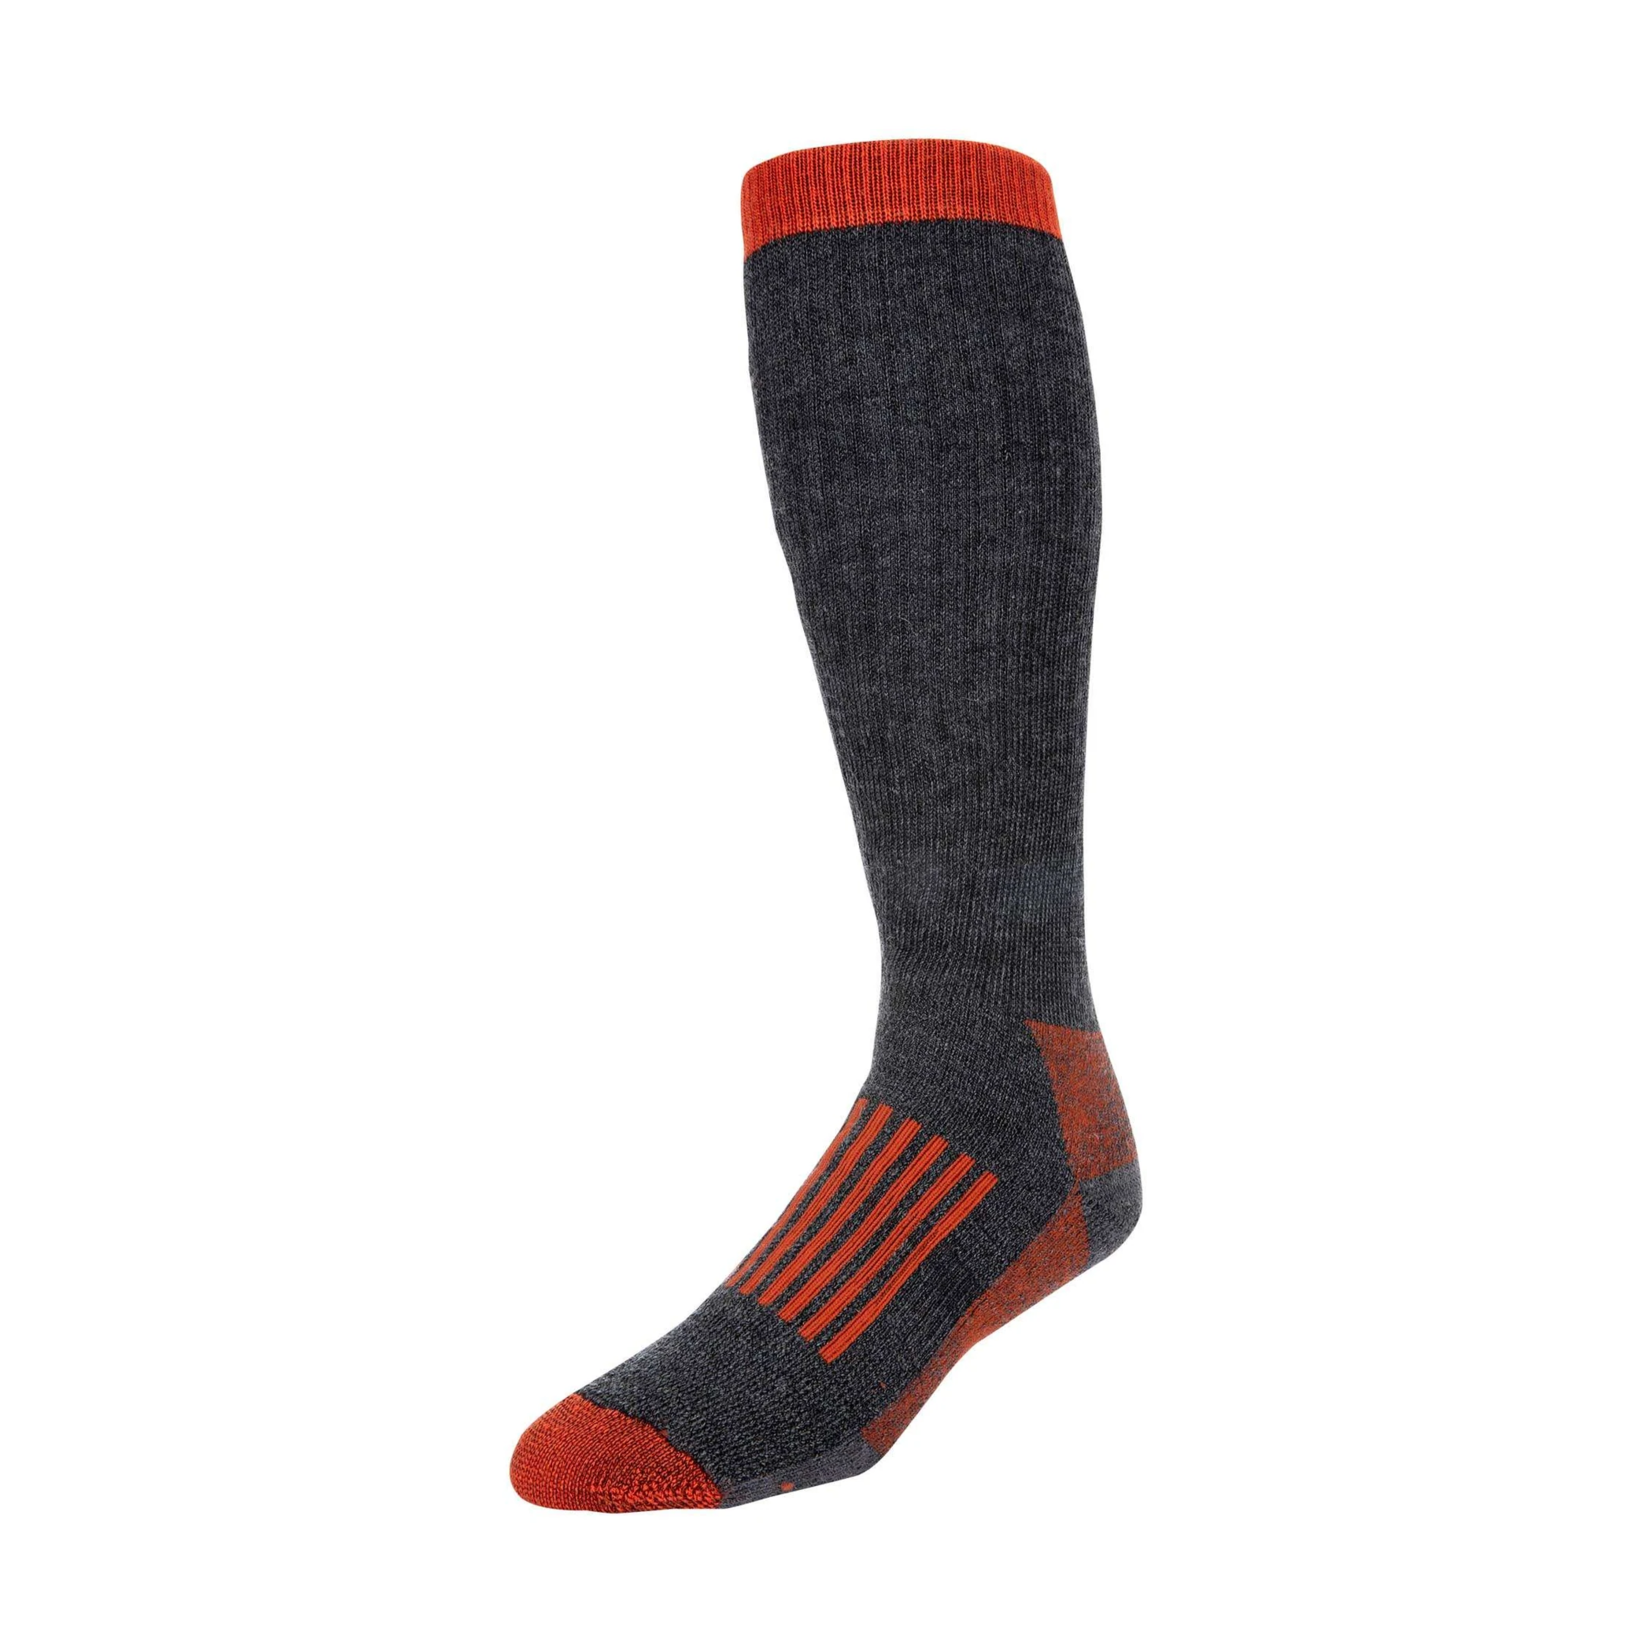 Simms Chaussettes Merino Thermal OTC (hommes) - Carbone